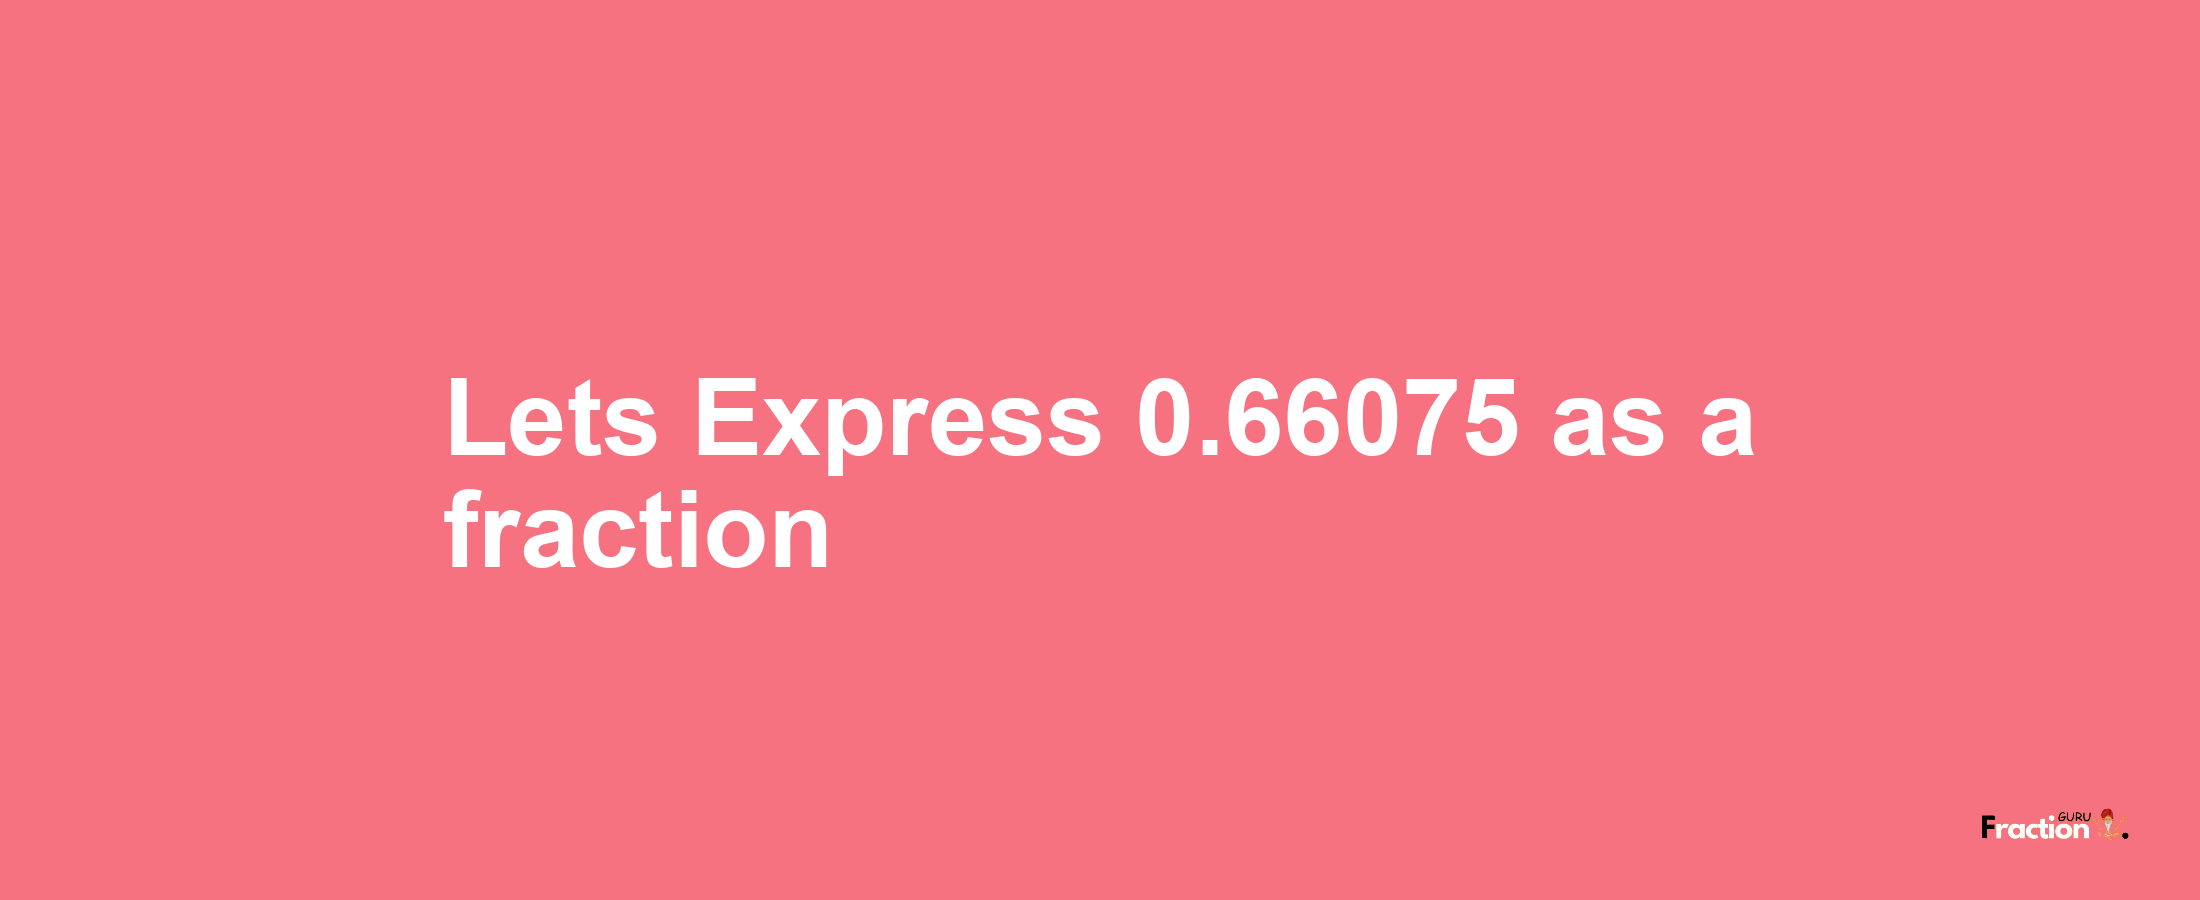 Lets Express 0.66075 as afraction